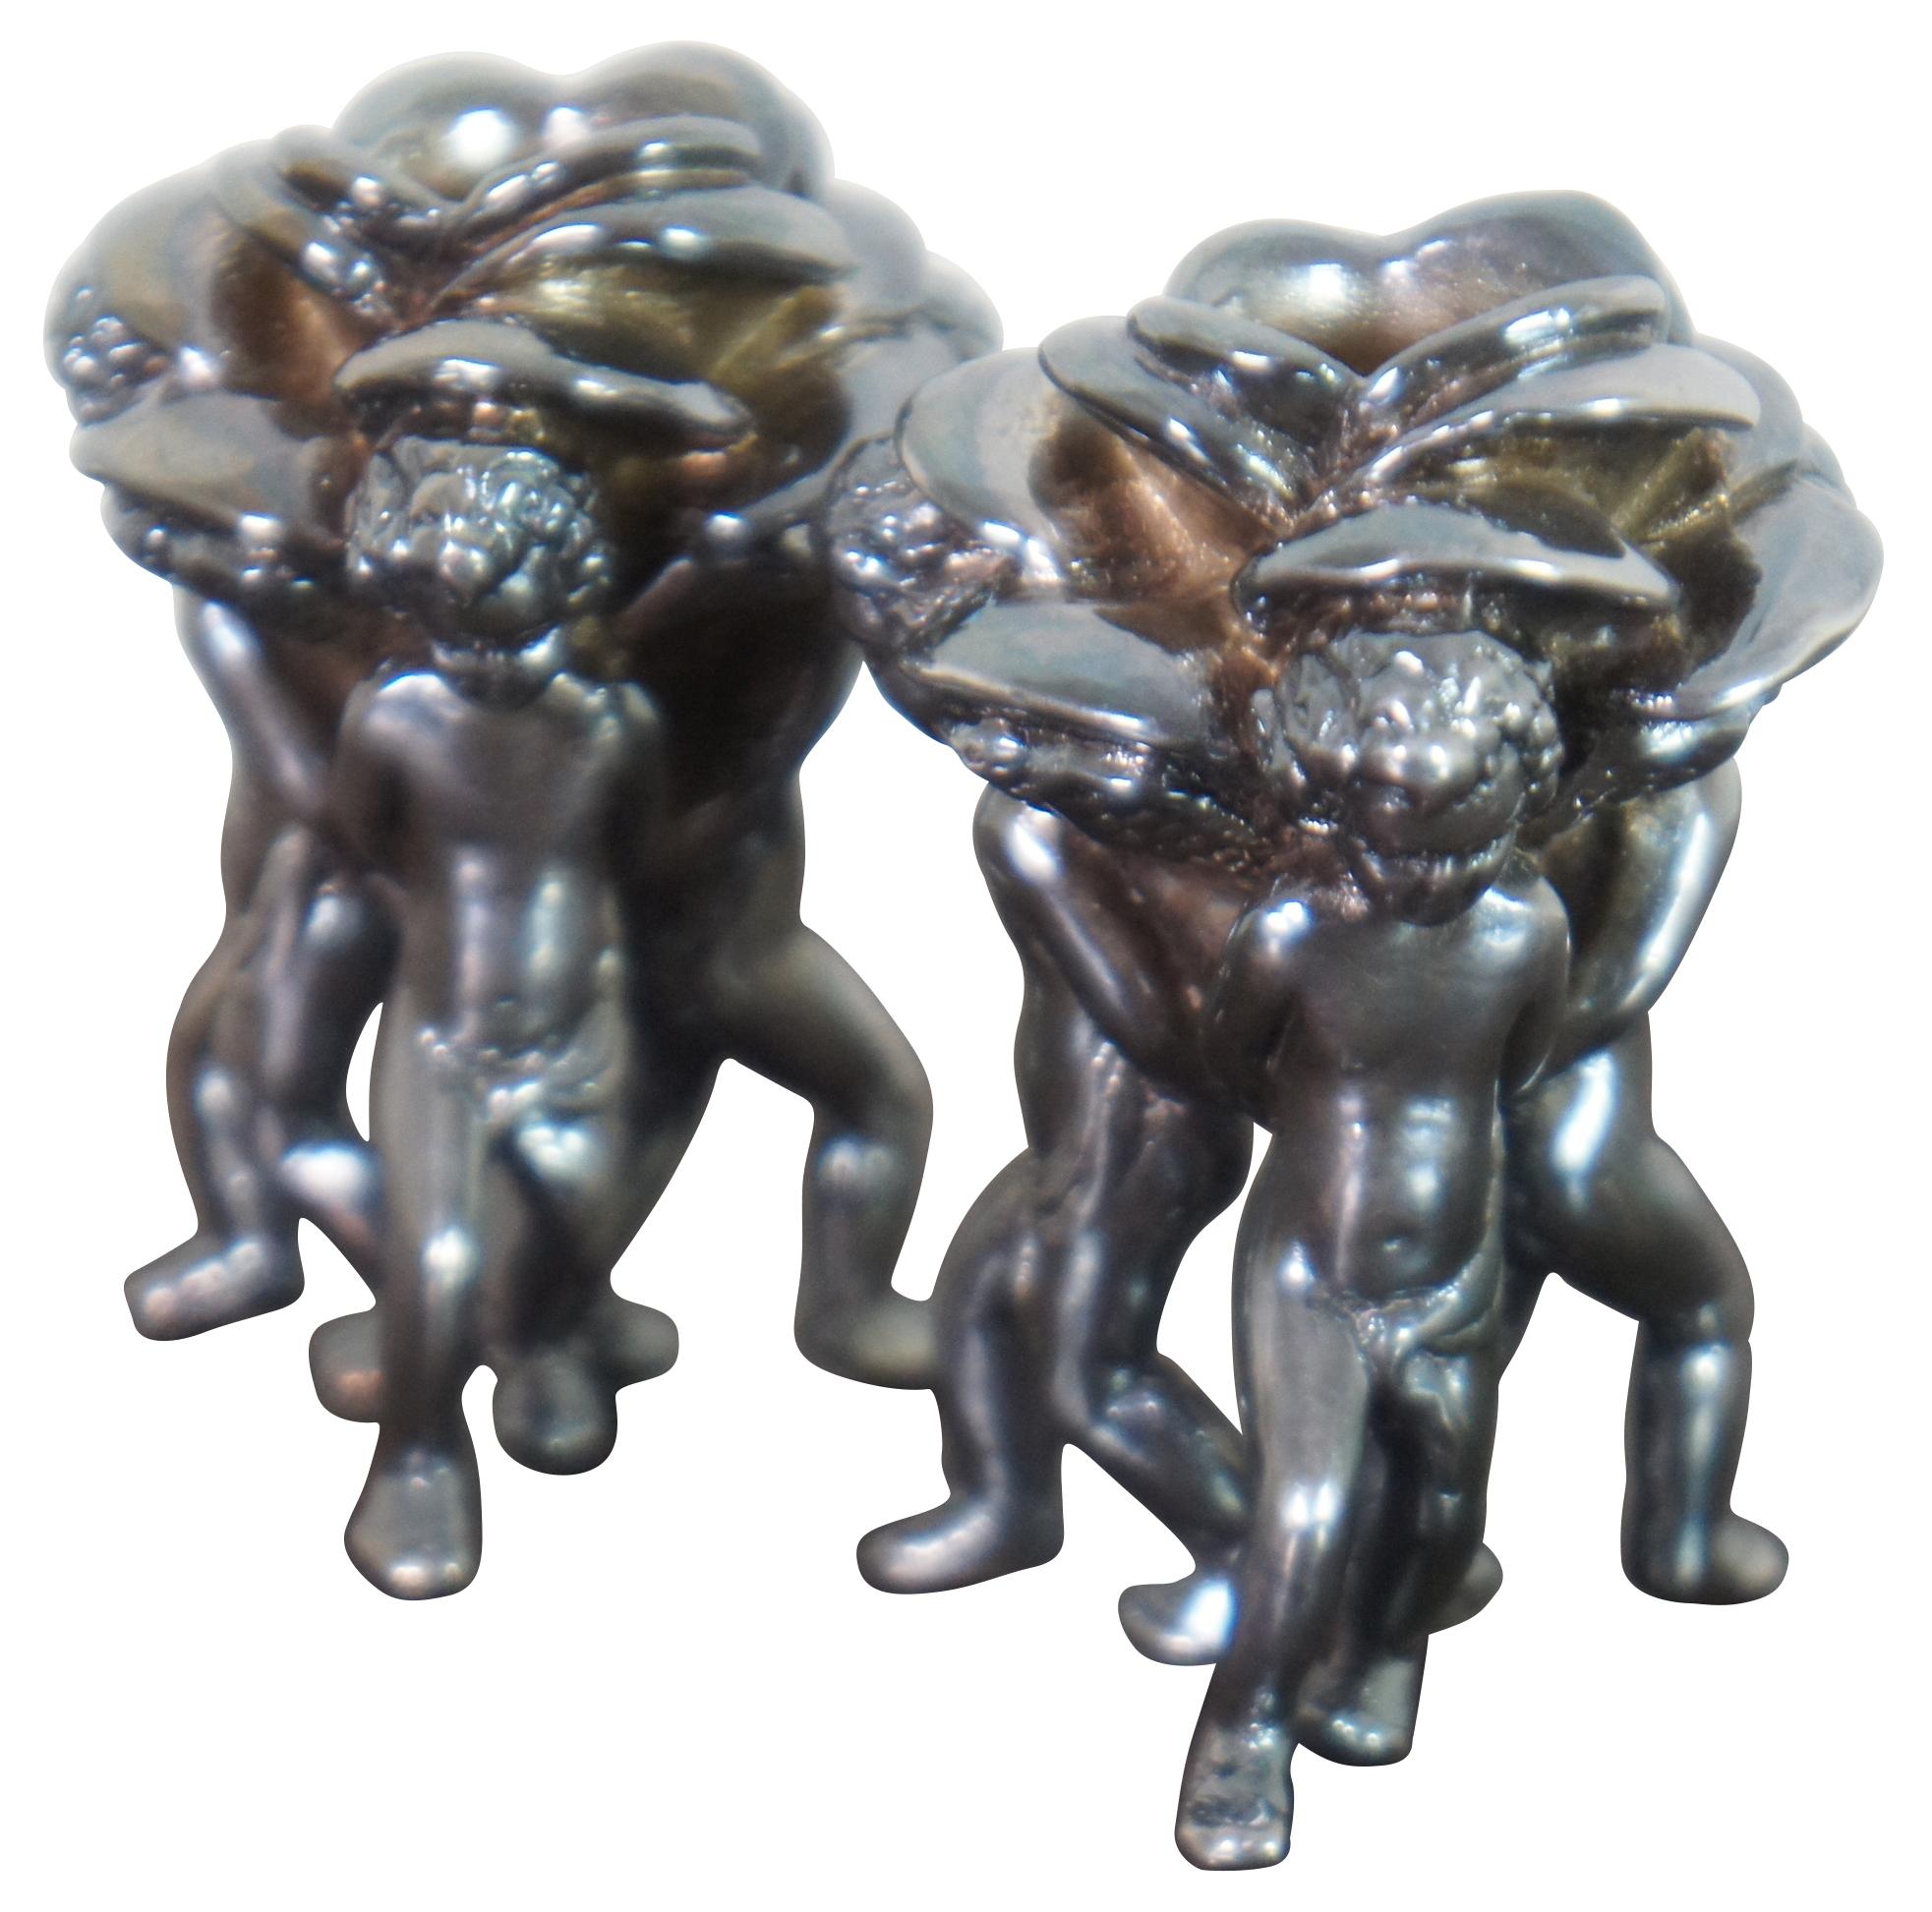 Pair of vintage 925 sterling silver taper candle holders featuring three cherubs holding a rose.

Measures: 1.75” x 1.5” x 2.375” / 33.8 g (Width x Depth x Height).